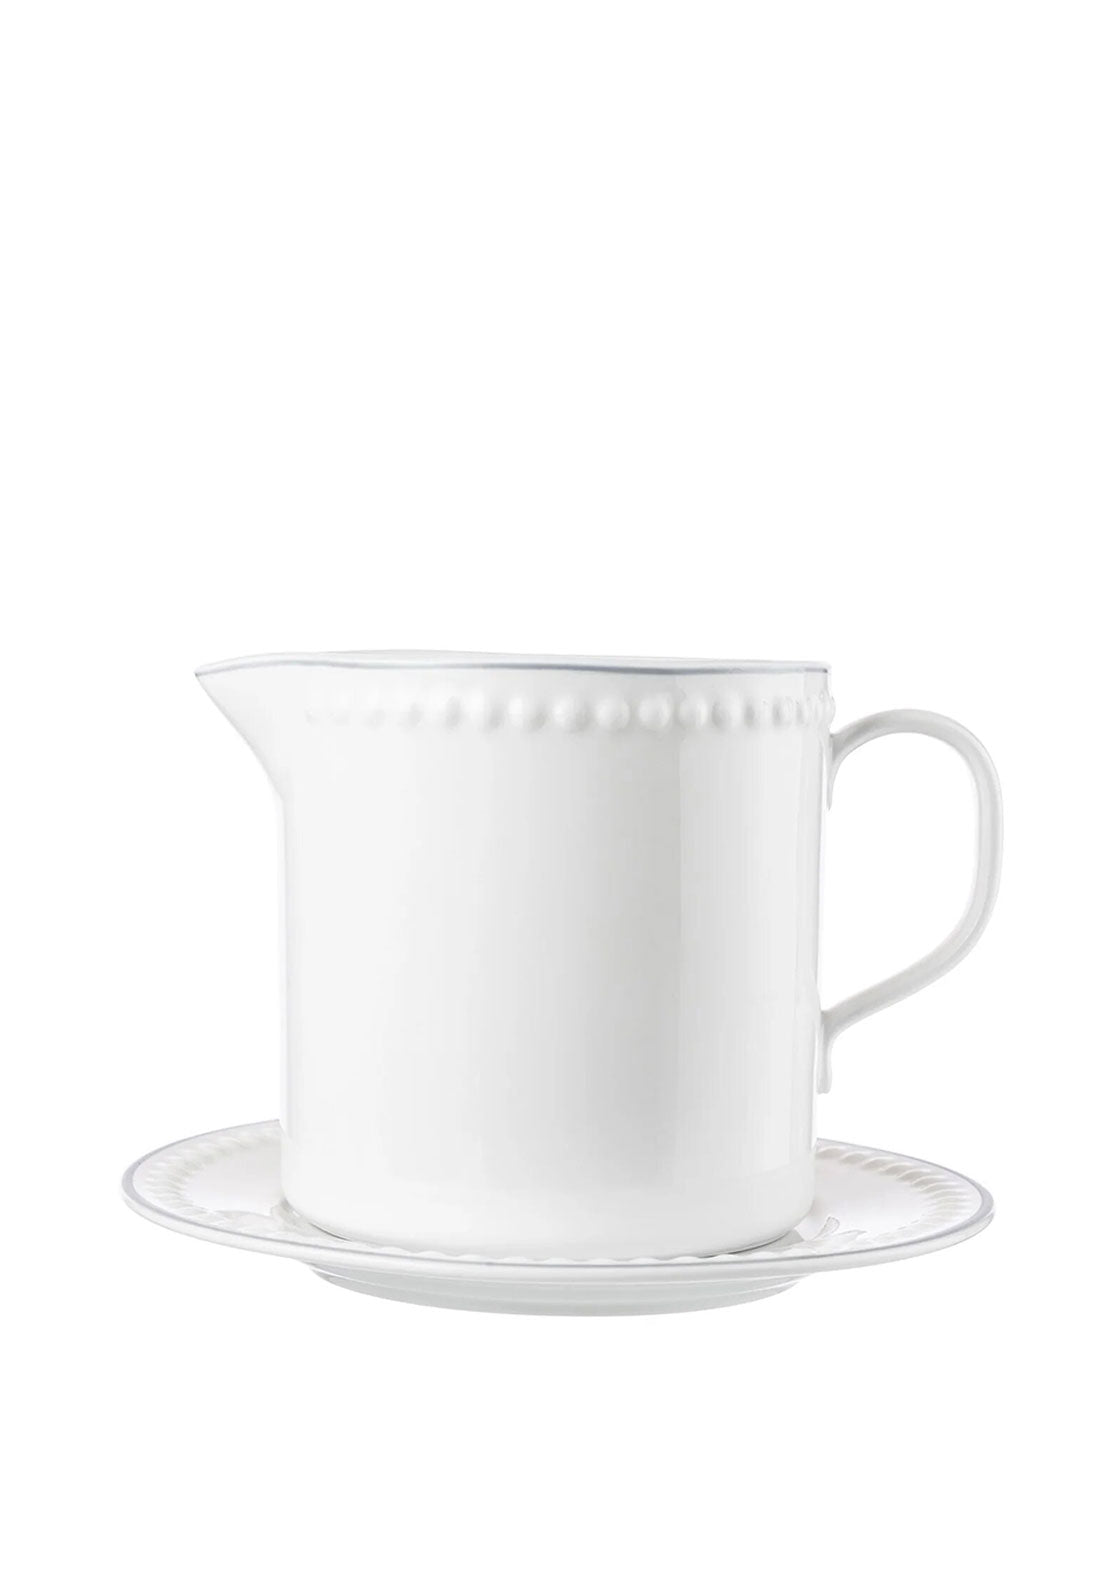 Mary Berry Signature Collection Gravy Boat & Saucer, 500ml - McElhinneys